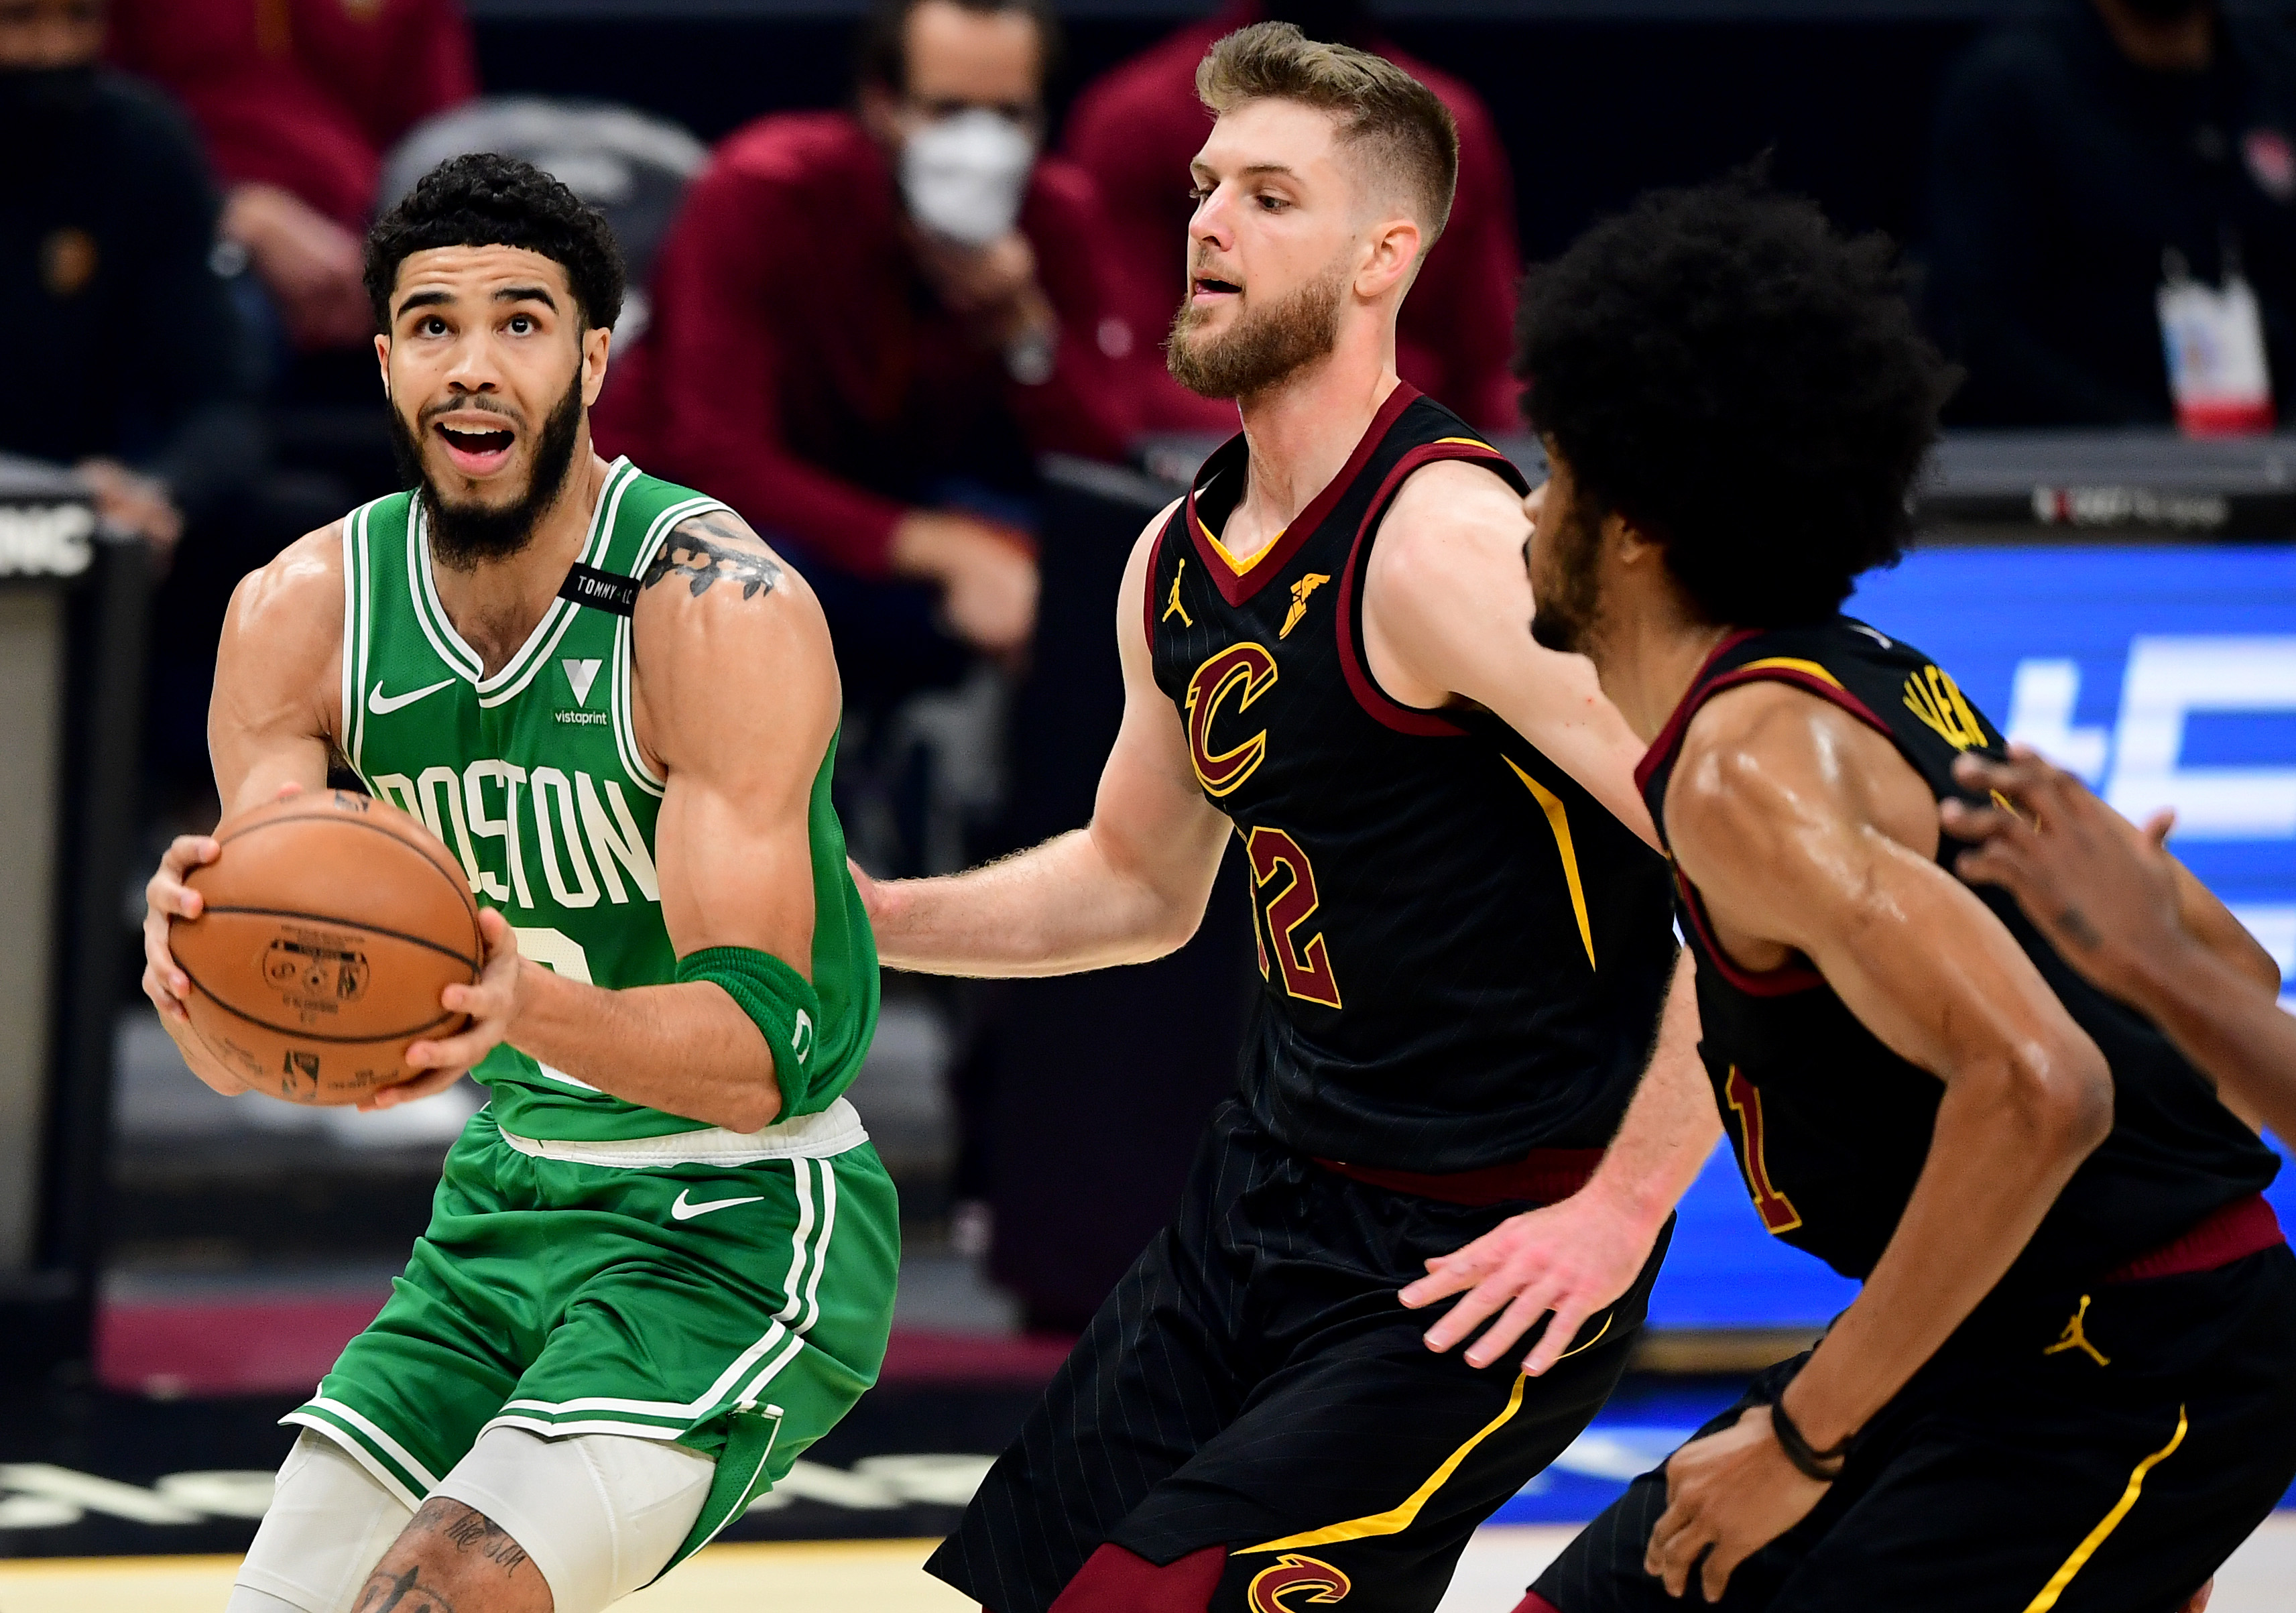 Does a red-hot Jayson Tatum give the Celtics any chance in the playoffs?